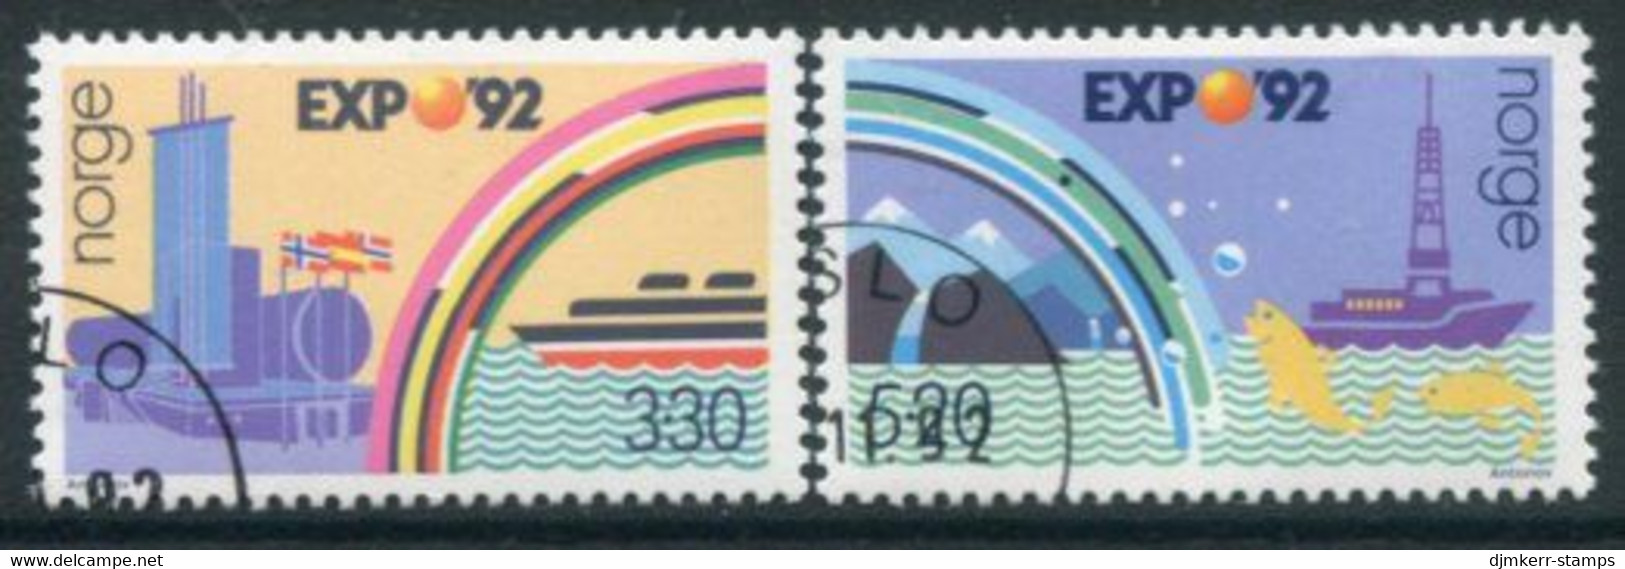 NORWAY 1992 EXPO '92, Seville Used.   Michel 1094-95 - Used Stamps